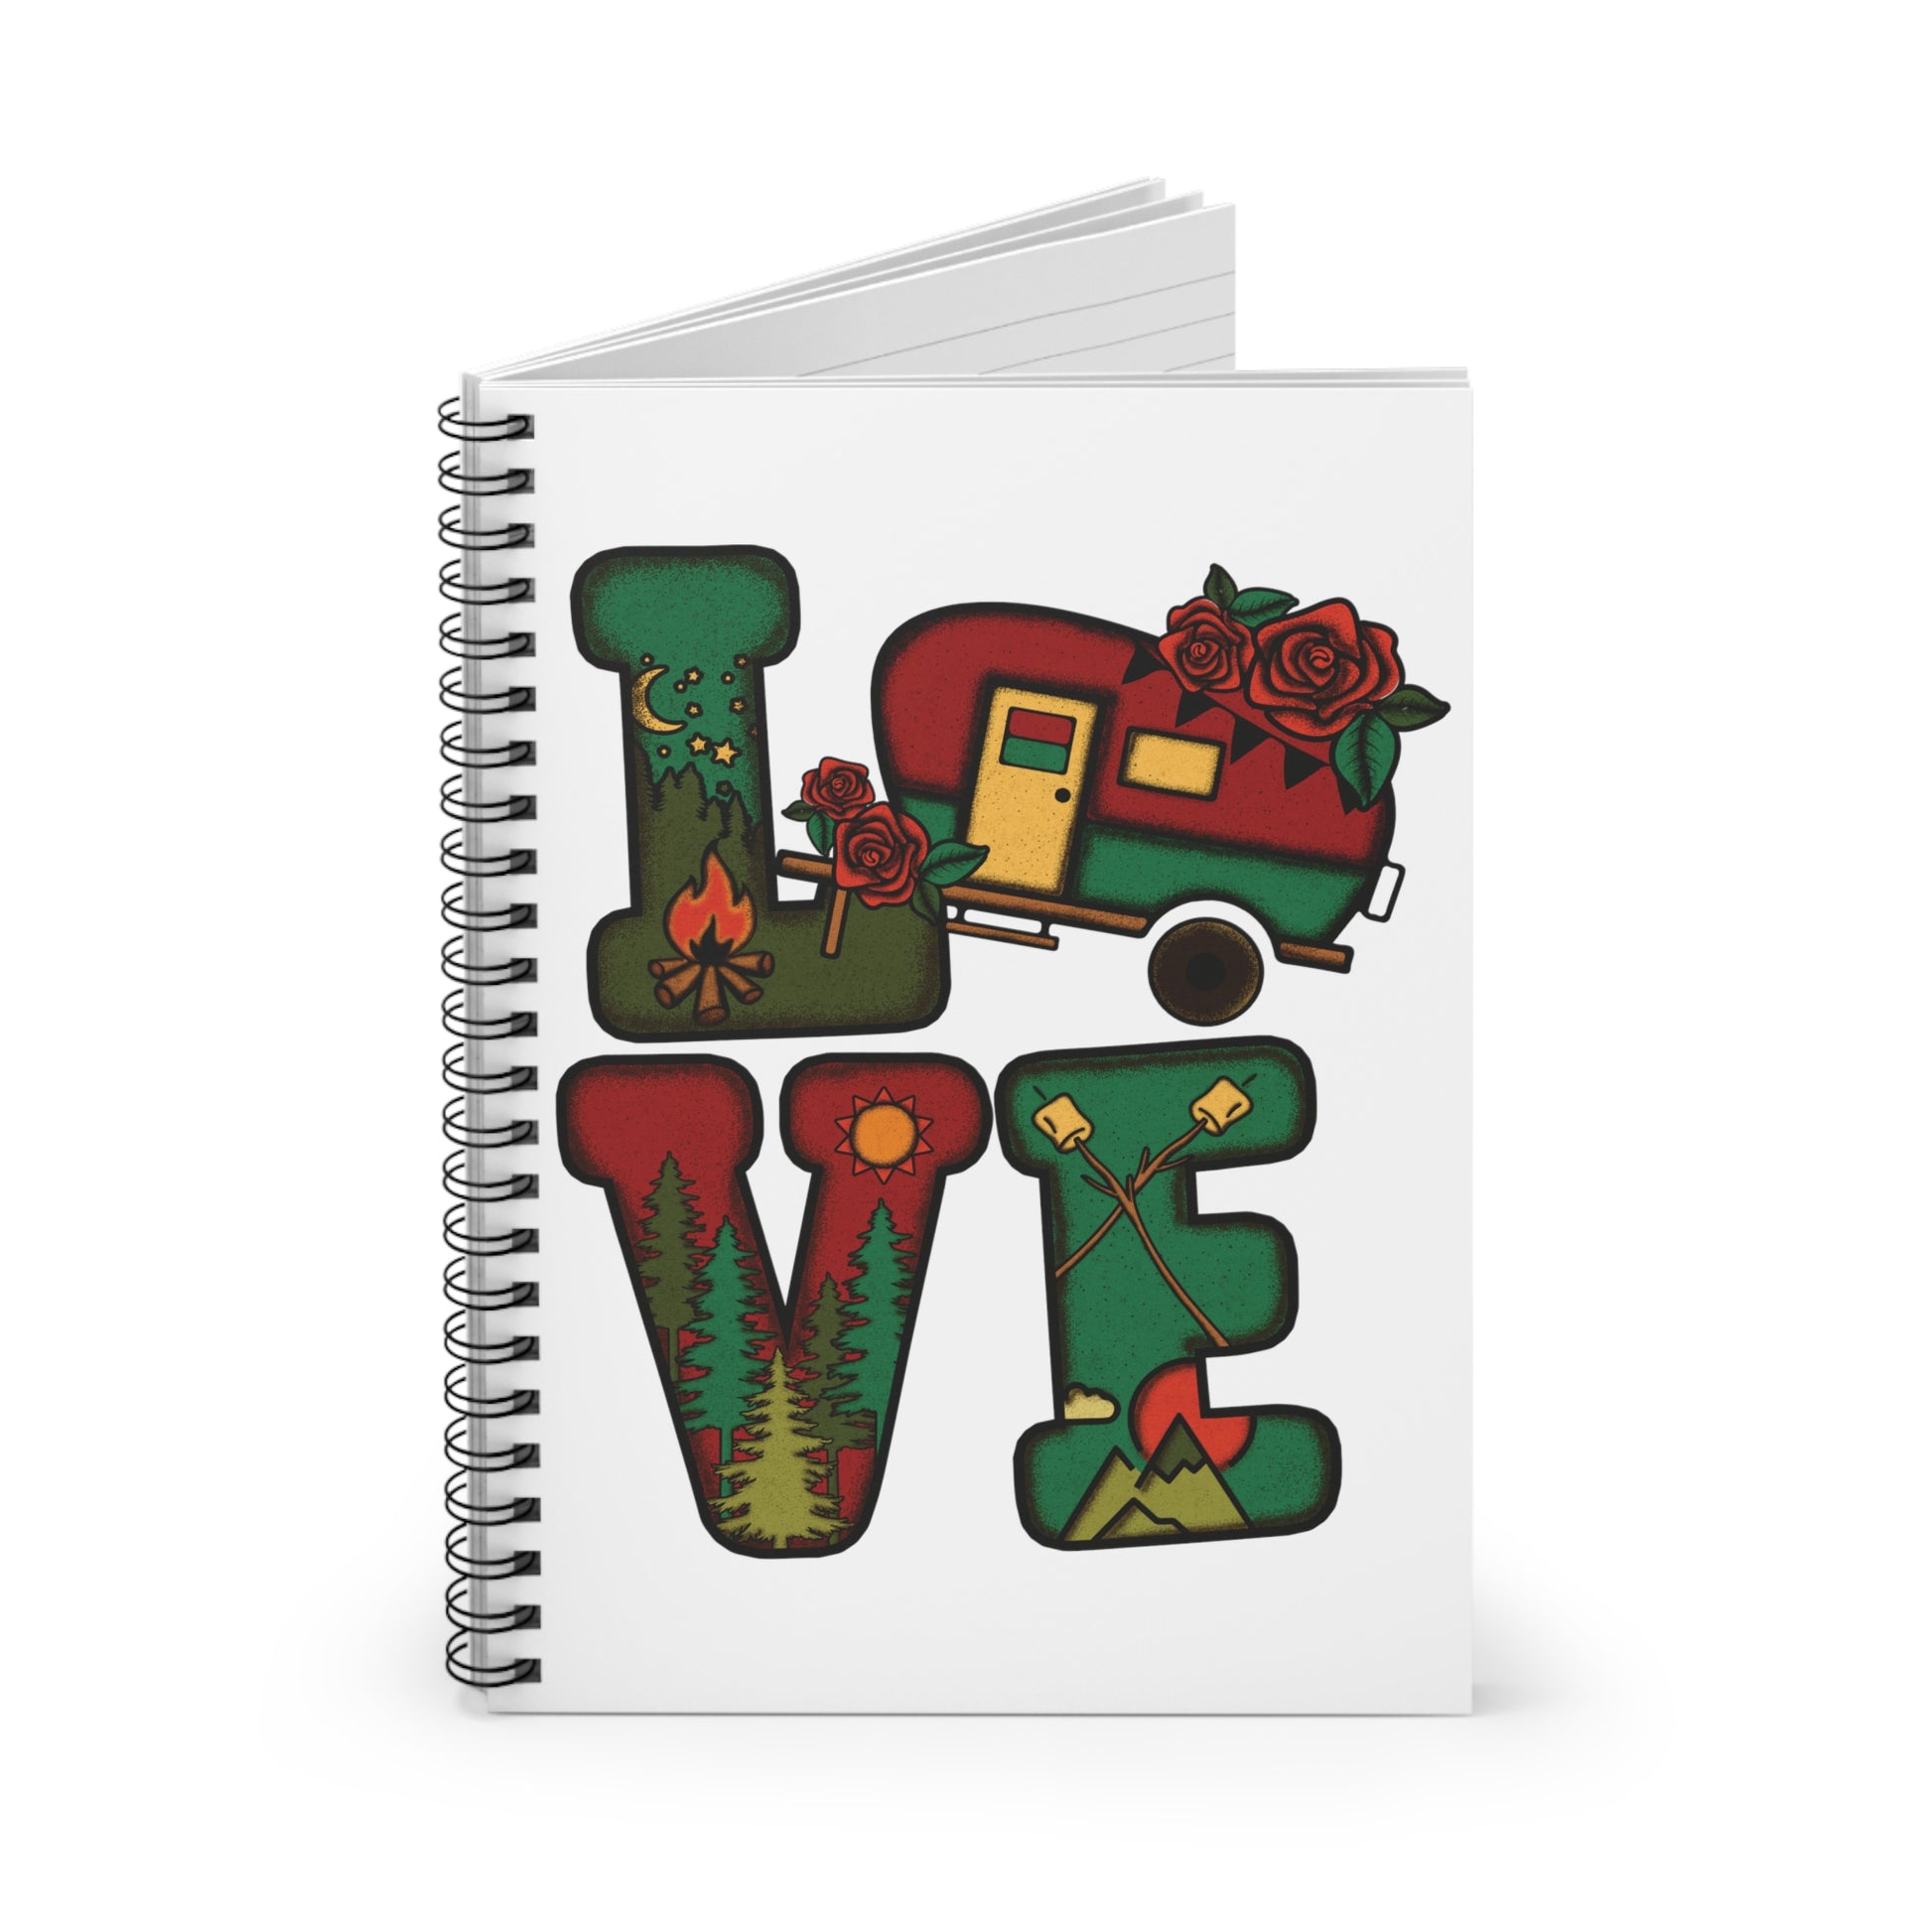 Camping LOVE: Spiral Notebook - Log Books - Journals - Diaries - and More Custom Printed by TheGlassyLass